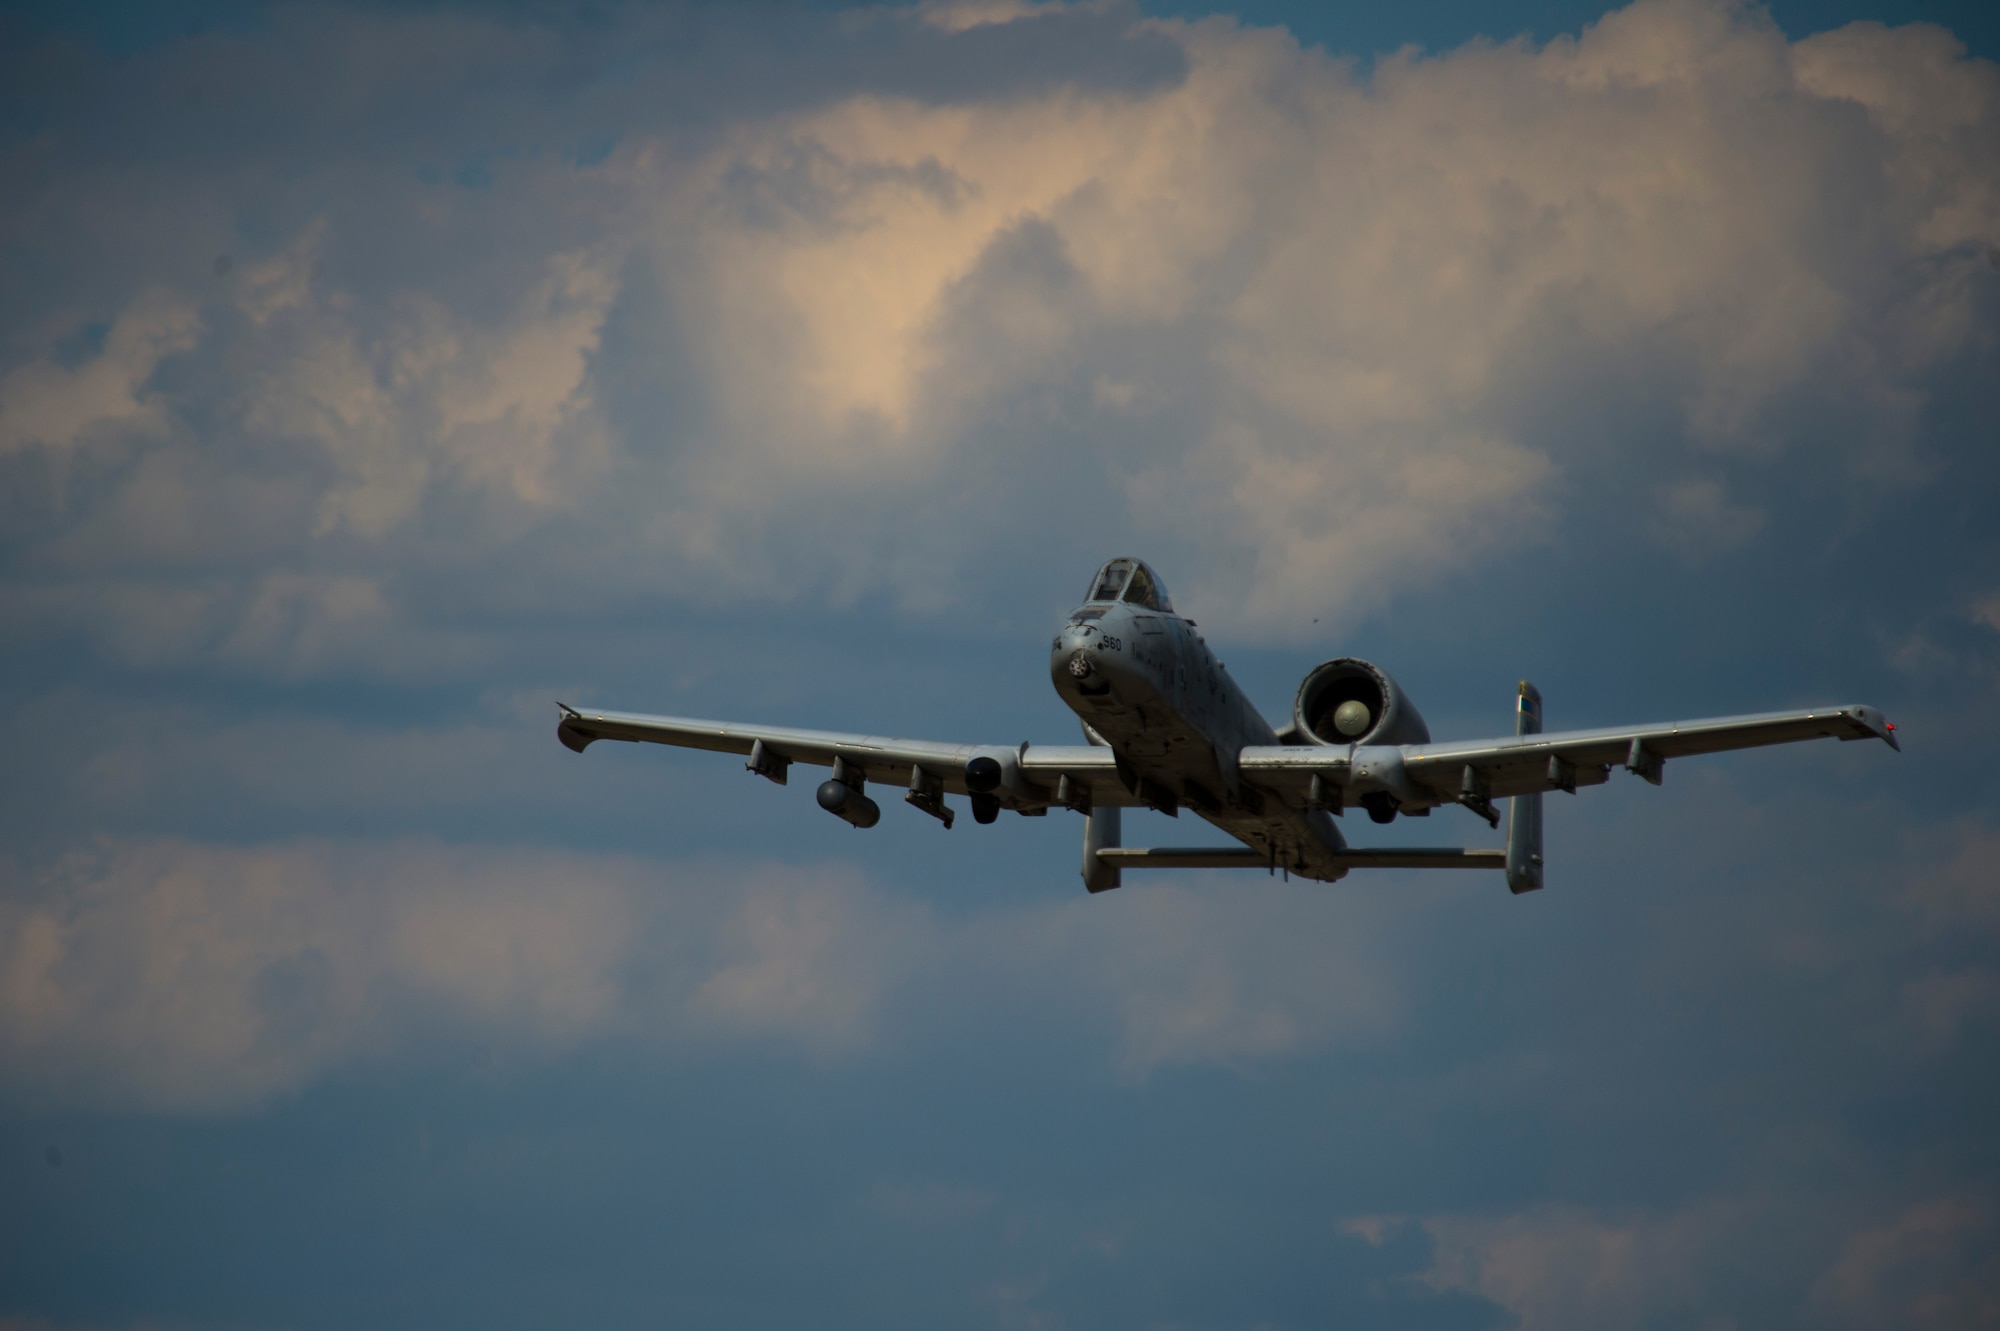 A 354th Expeditionary Fighter Squadron A-10C Thunderbolt II aircraft soars through the sky during an austere landing training exercise at Nowe Miasto, Poland, July 20, 2015. The 354th EFS is currently operating at Lask Air Base, Poland. (U.S. Air Force photo by Airman 1st Class Luke Kitterman/Released)